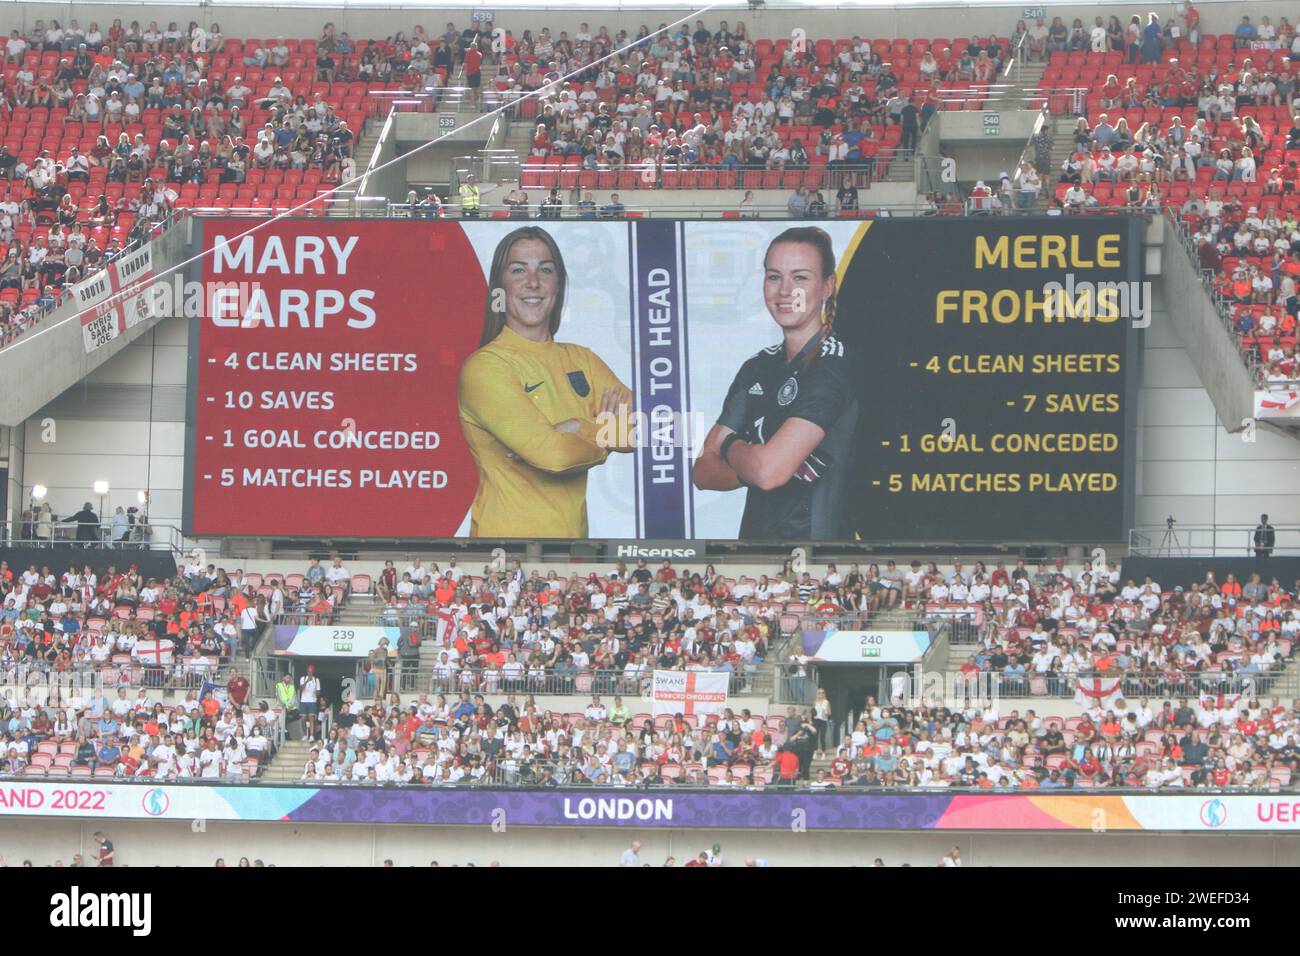 Mary Earps and Merle Frohms on big screen before UEFA Women's Euro Final 2022 England v Germany at Wembley Stadium, London 31 July 2022 Stock Photo